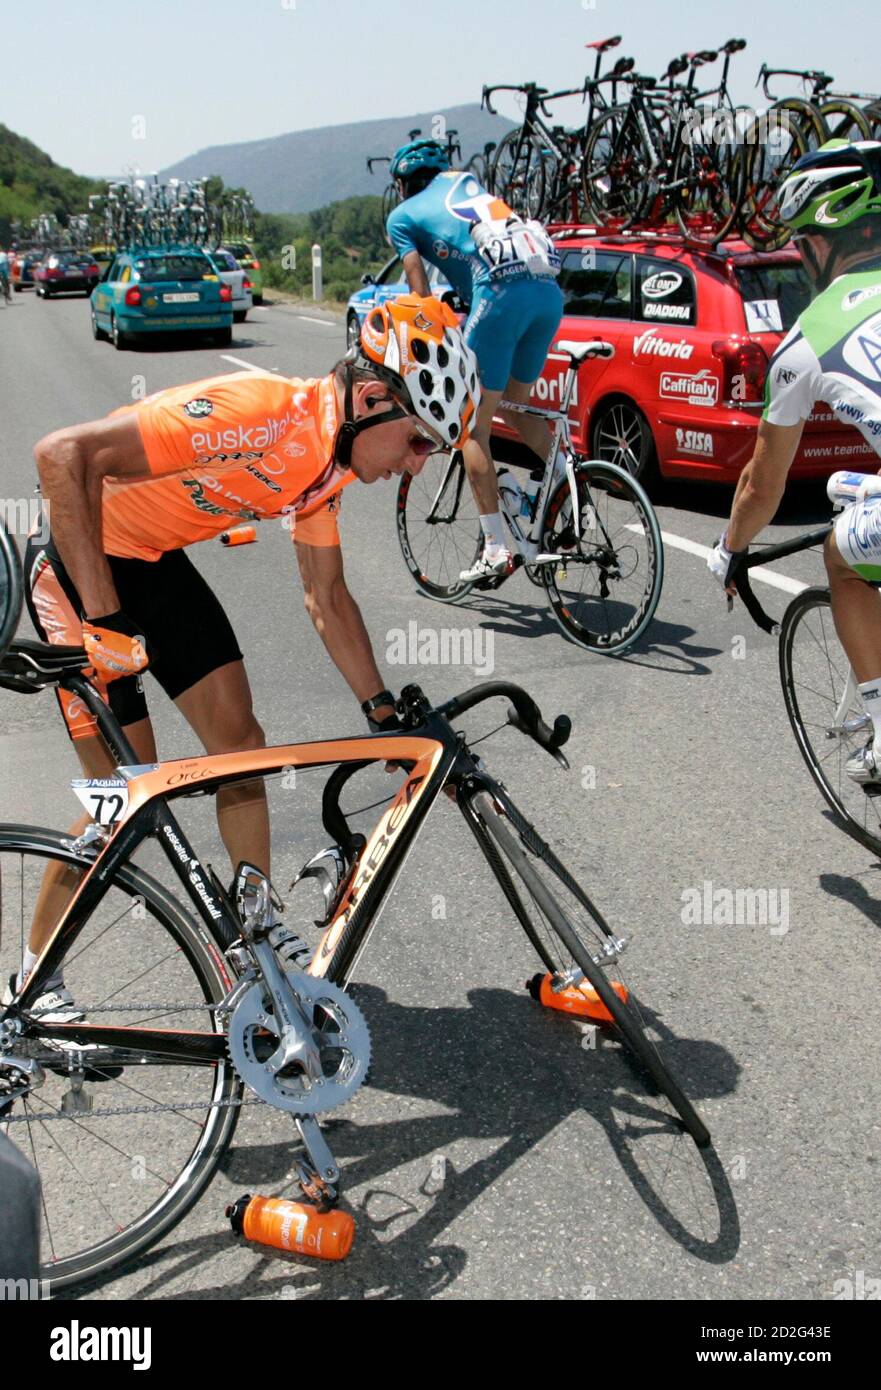 Euskaltel team rider Igor Anton of Spain recovers from a crash during the  10th stage of the 94th Tour de France cycling race between Tallard and  Marseille, July 18, 2007. REUTERS/Thierry Roge (